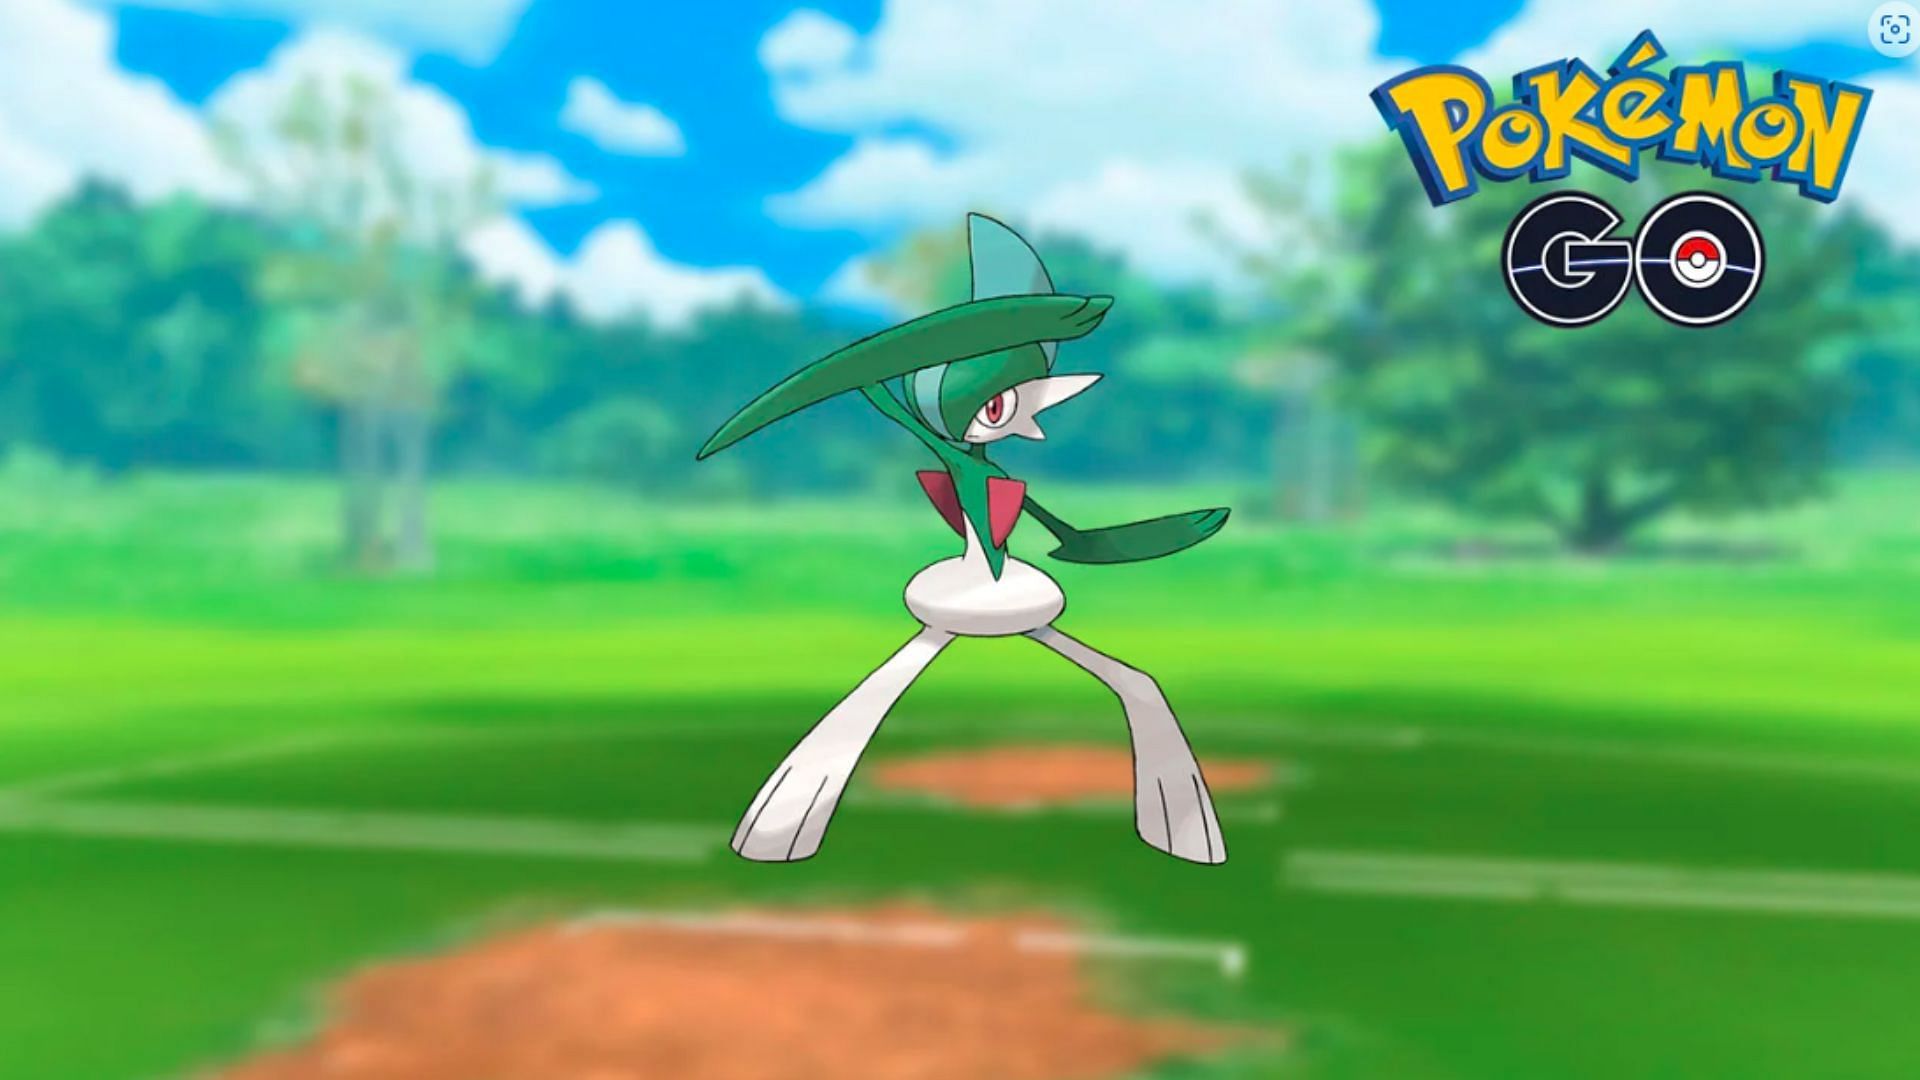 First Pokémon GO screenshot of Shiny Gardevoir with the Community Day  exclusive move Synchronoise